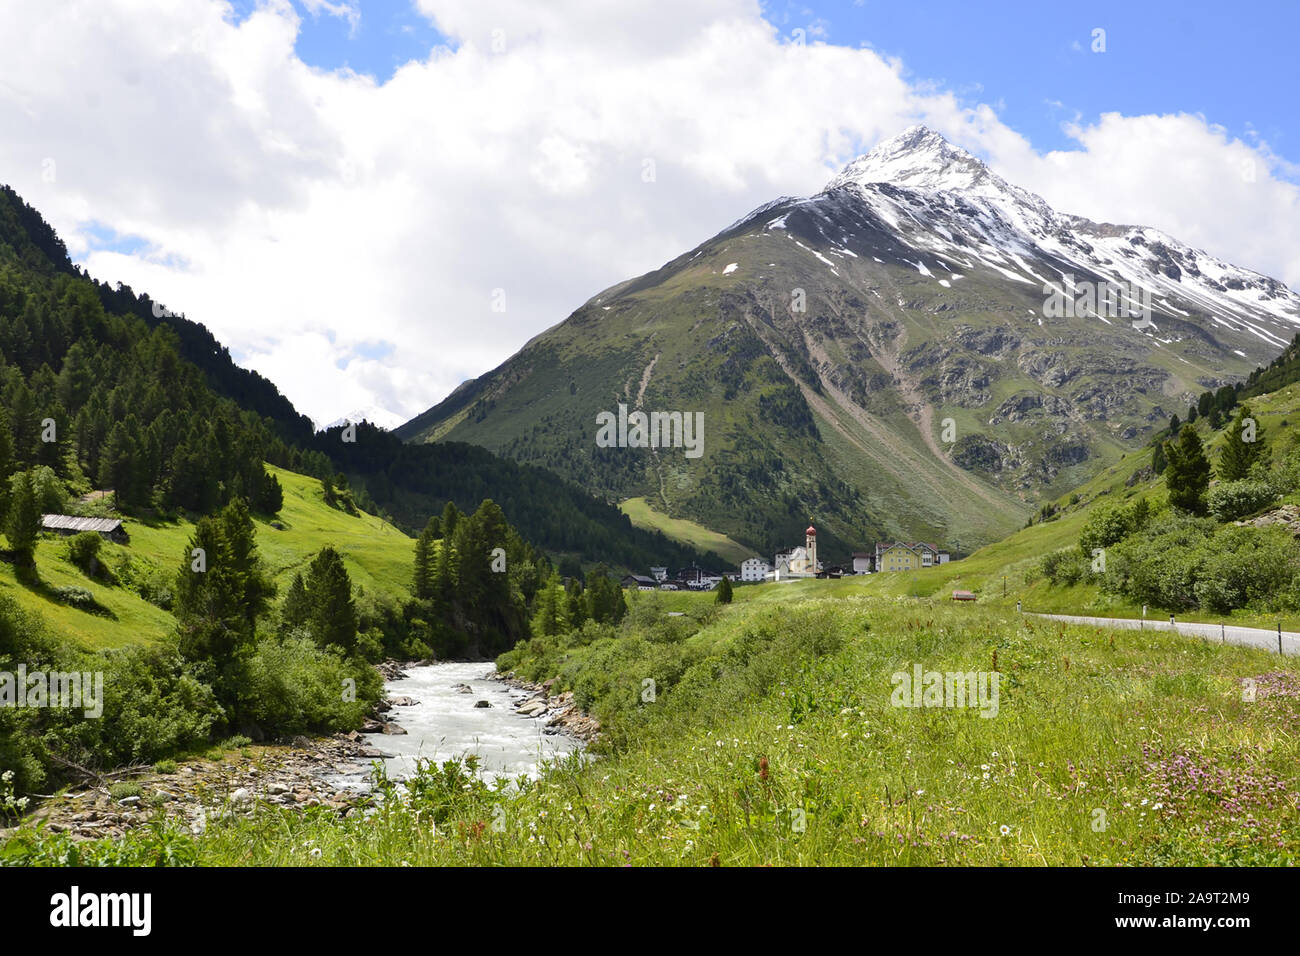 Tyrolean village with snow capped mountains, pine trees and alpine river in Austria Stock Photo